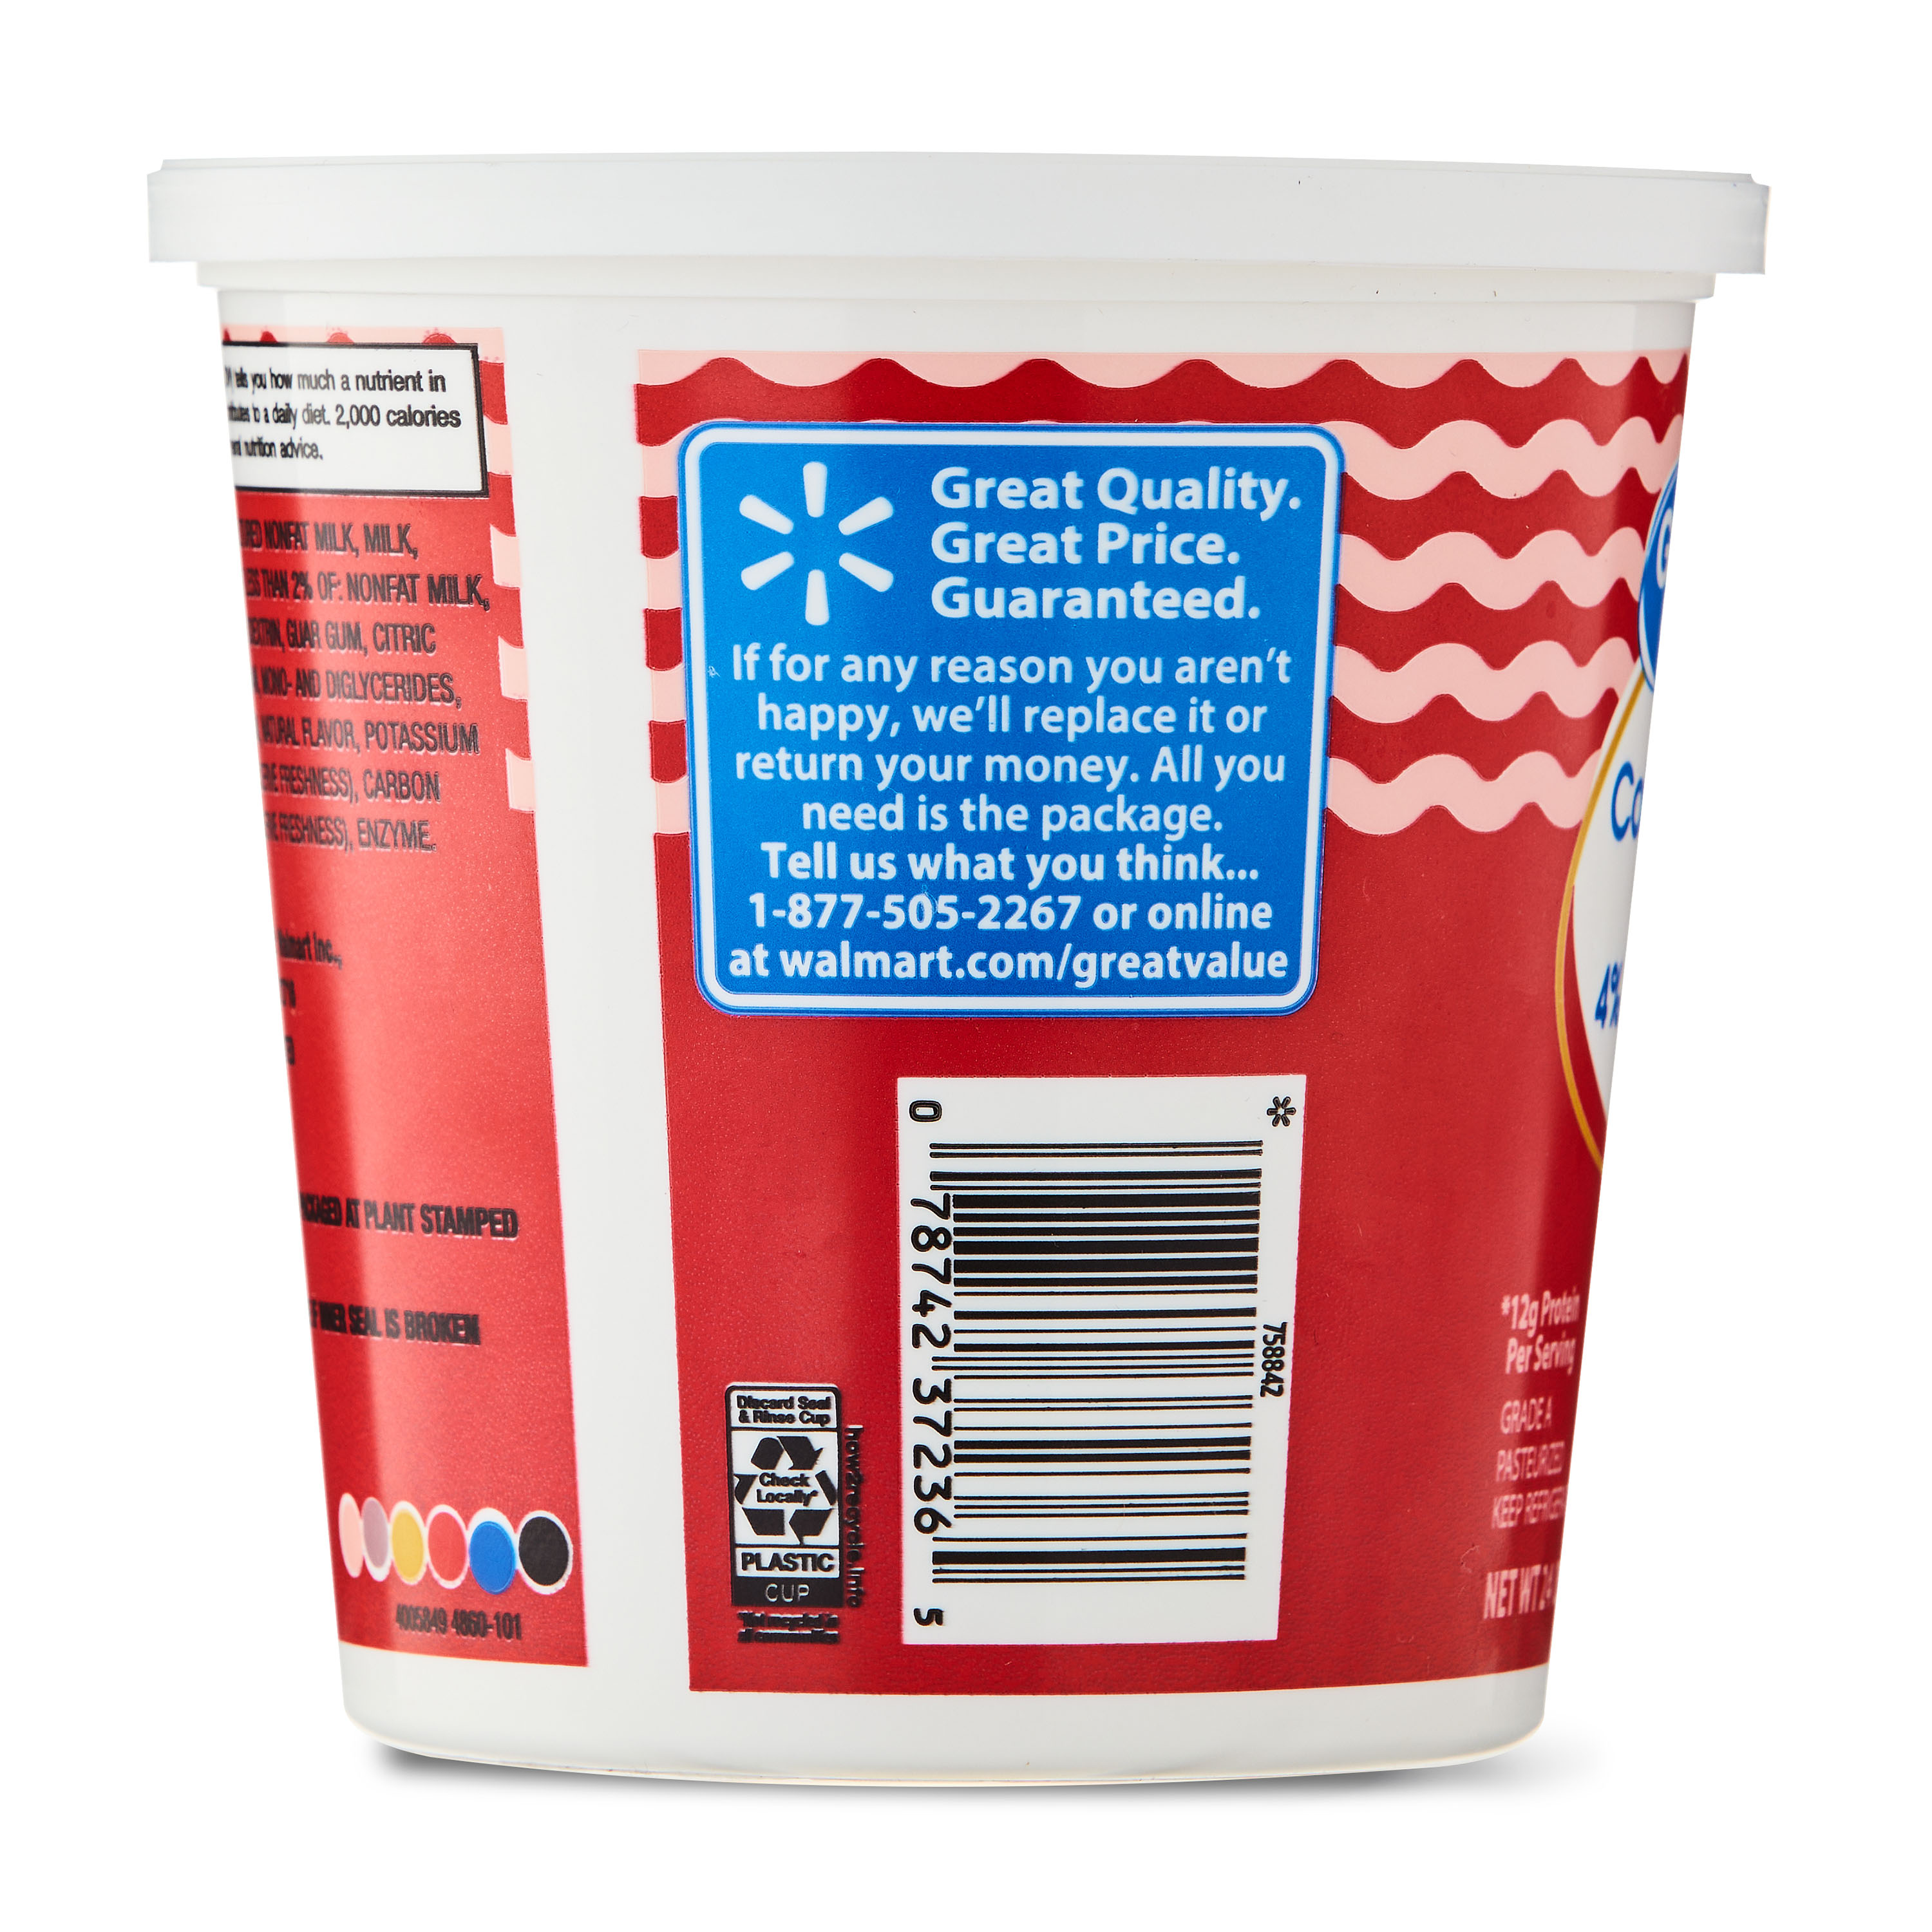 Great Value 4% Milkfat Minimum Small Curd Cottage Cheese, 24 oz - image 5 of 7